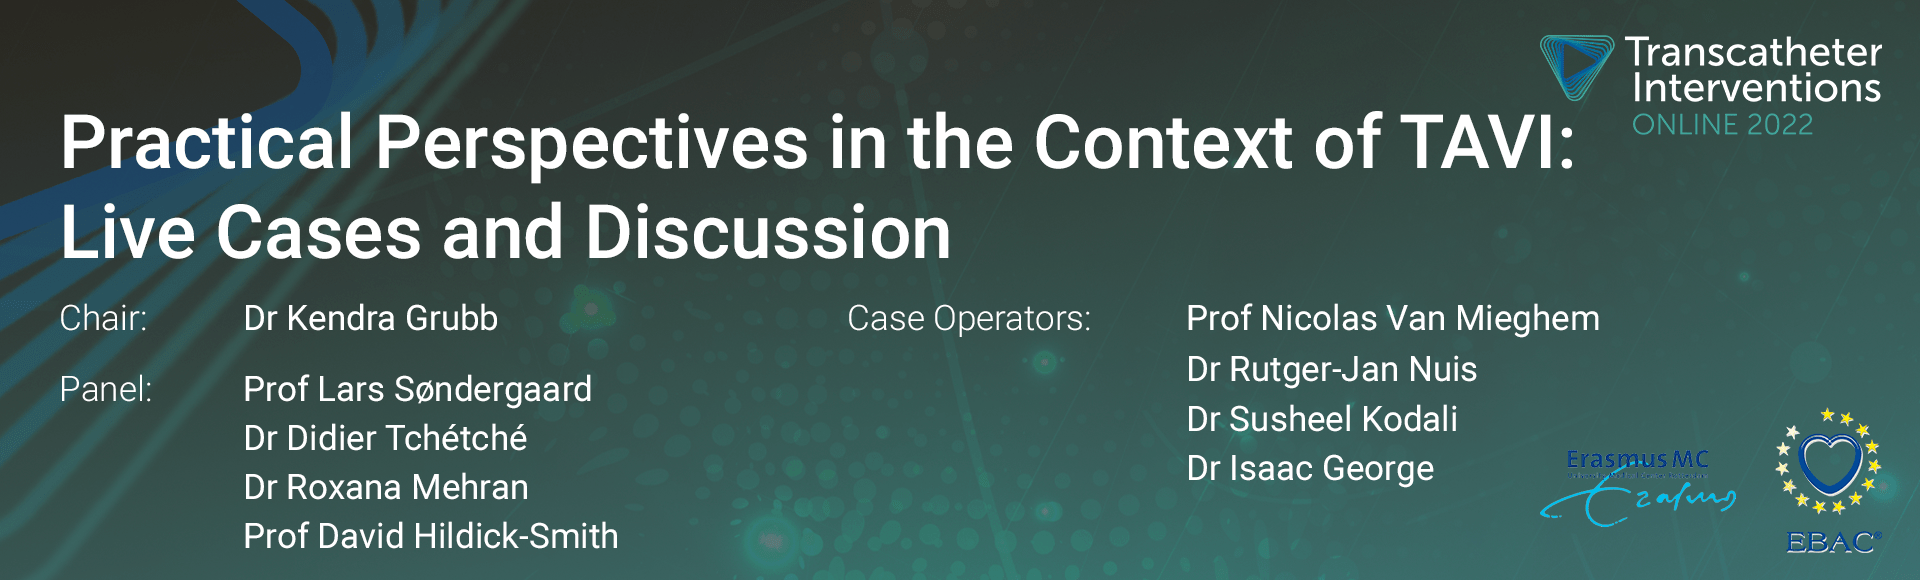 Transcatheter Interventions Online 2022 - Session 1.4: Practical Perspectives in the Context of TAVI: Live Cases and Discussion